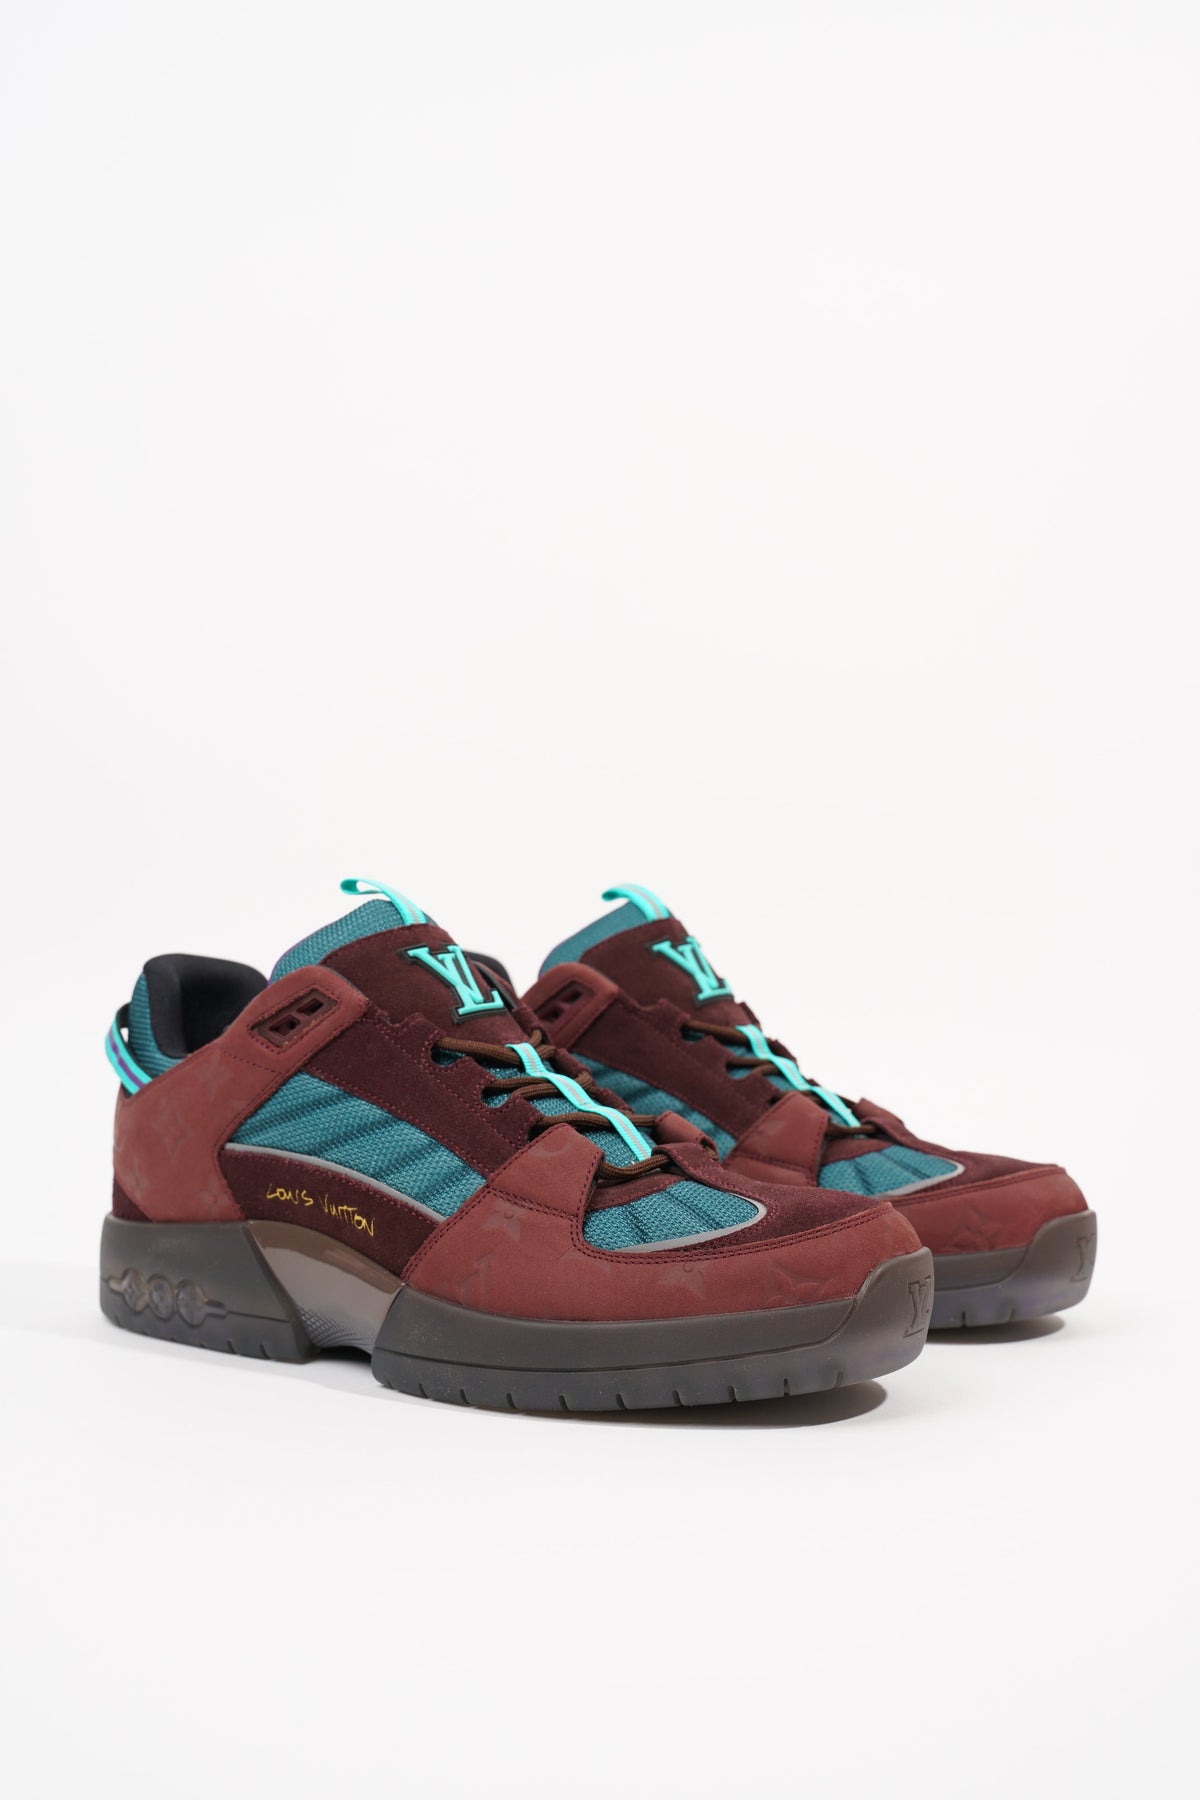 LV x YK LV Archlight Trainers Cacao Brown